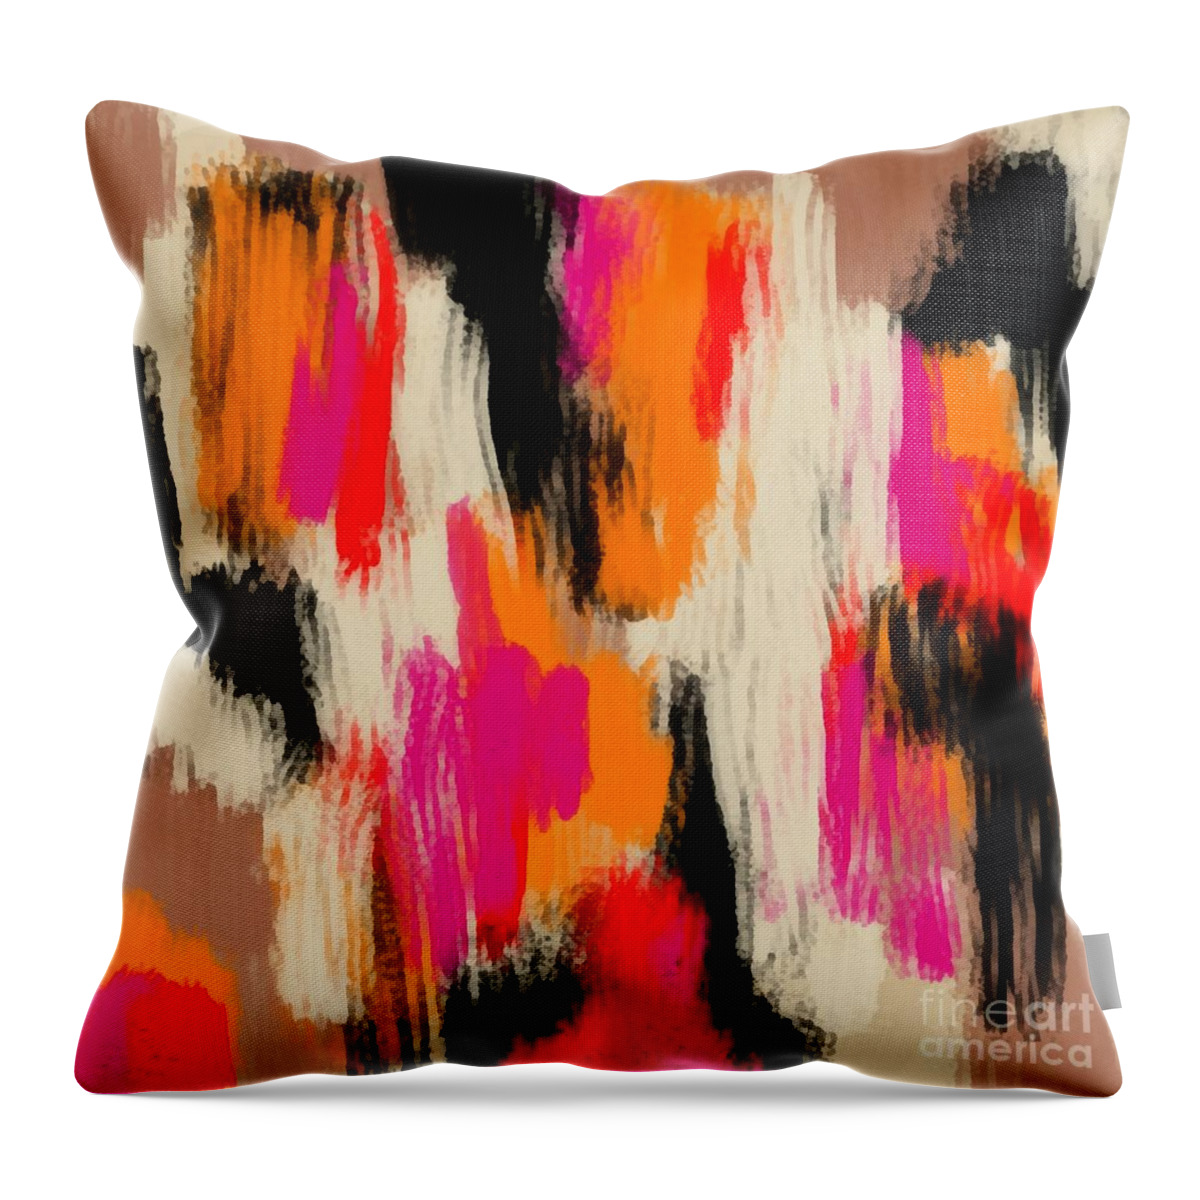 Delynn Throw Pillow featuring the digital art Red Pink Black Brown Digital Abstract Painting by Delynn Addams